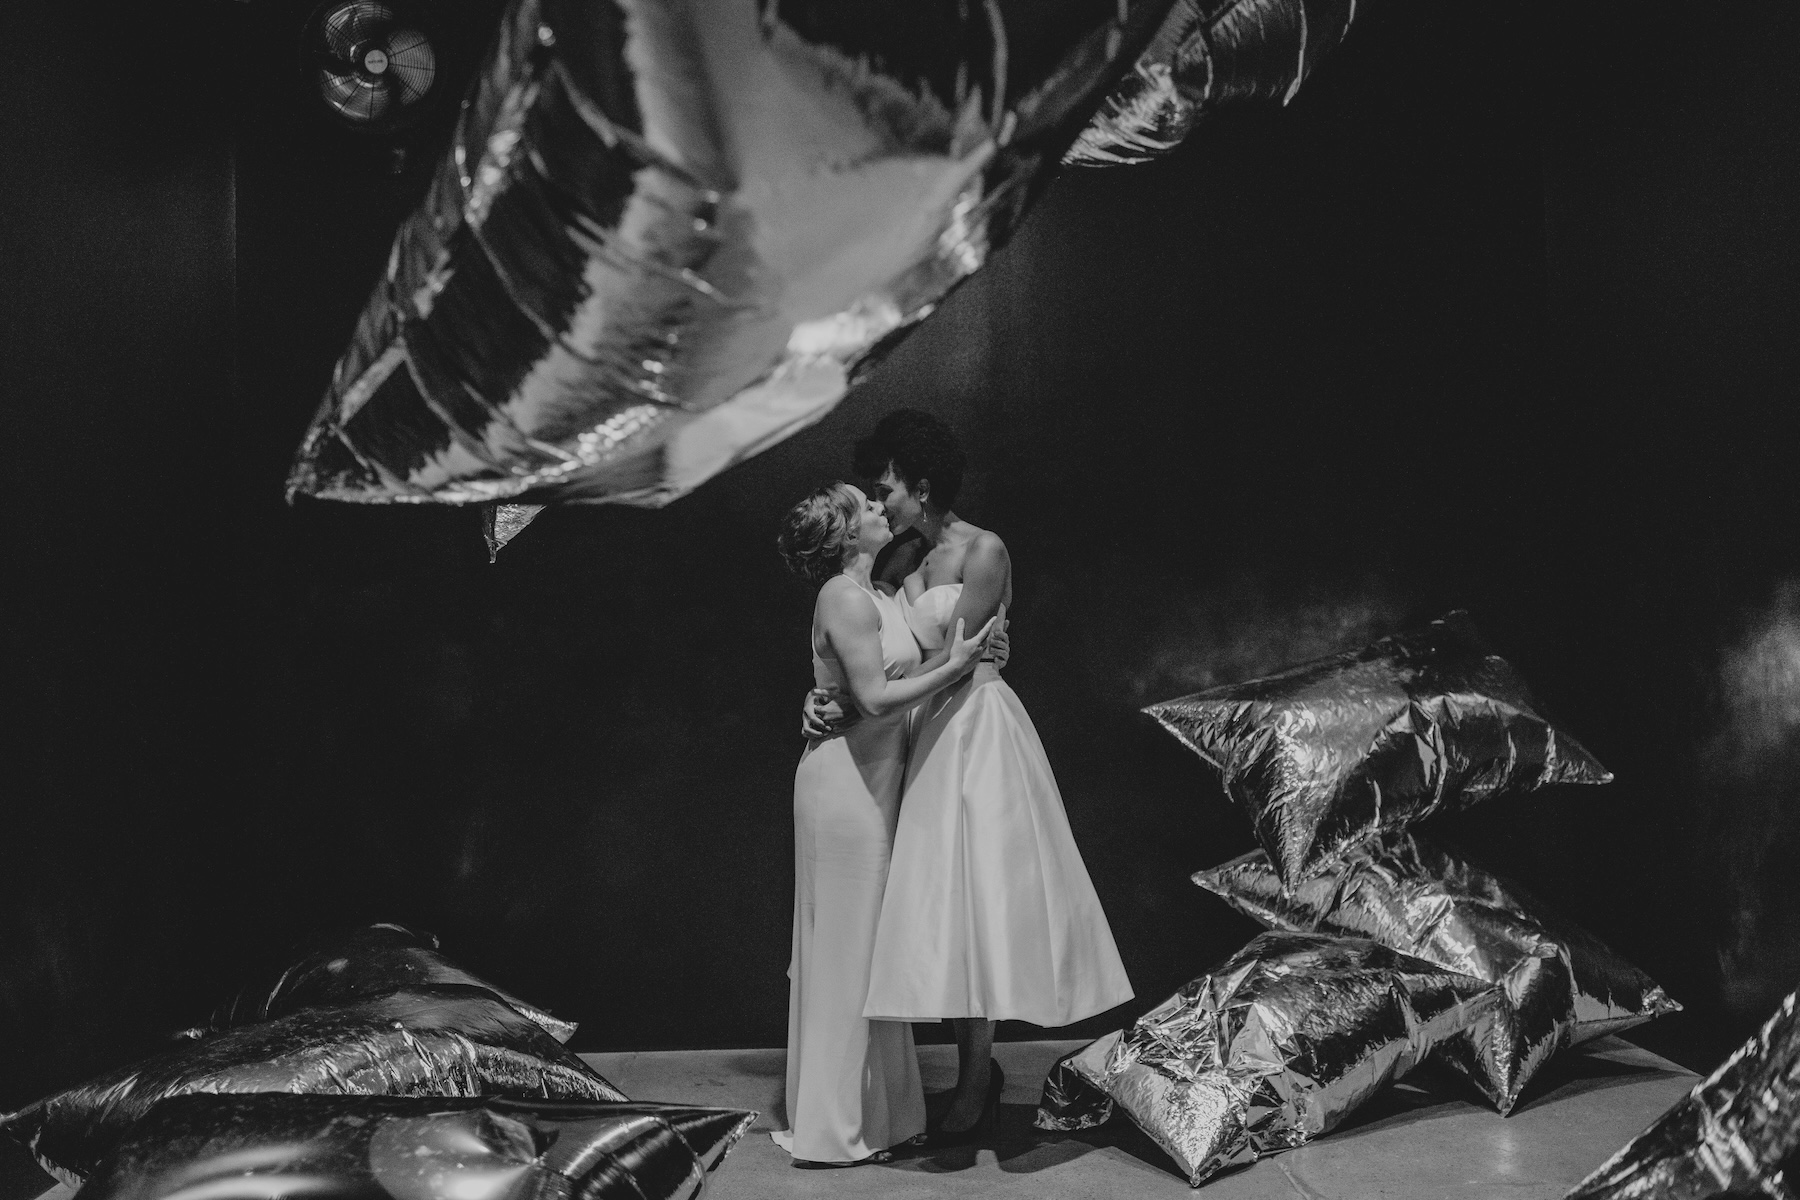 Black and white photography of two people embracing for a kiss, both wearing light dresses. They stand in the middle of a dark room with Andy Warhol's Silver Clouds (large mylar silver balloons) floating around them.